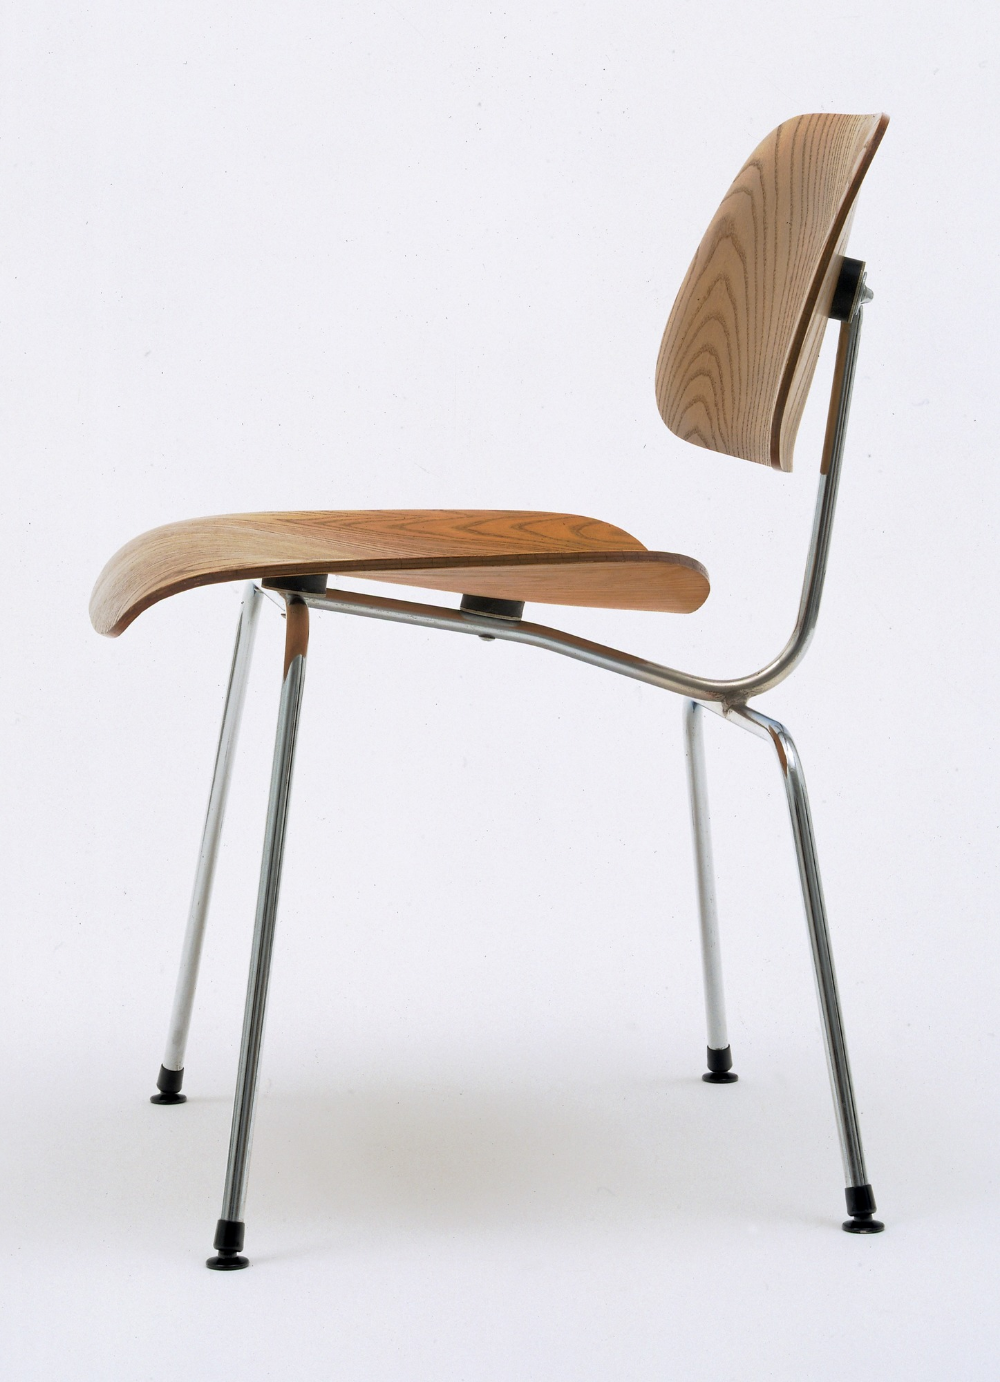 Eames Chairs: Iconic Design for Your Home